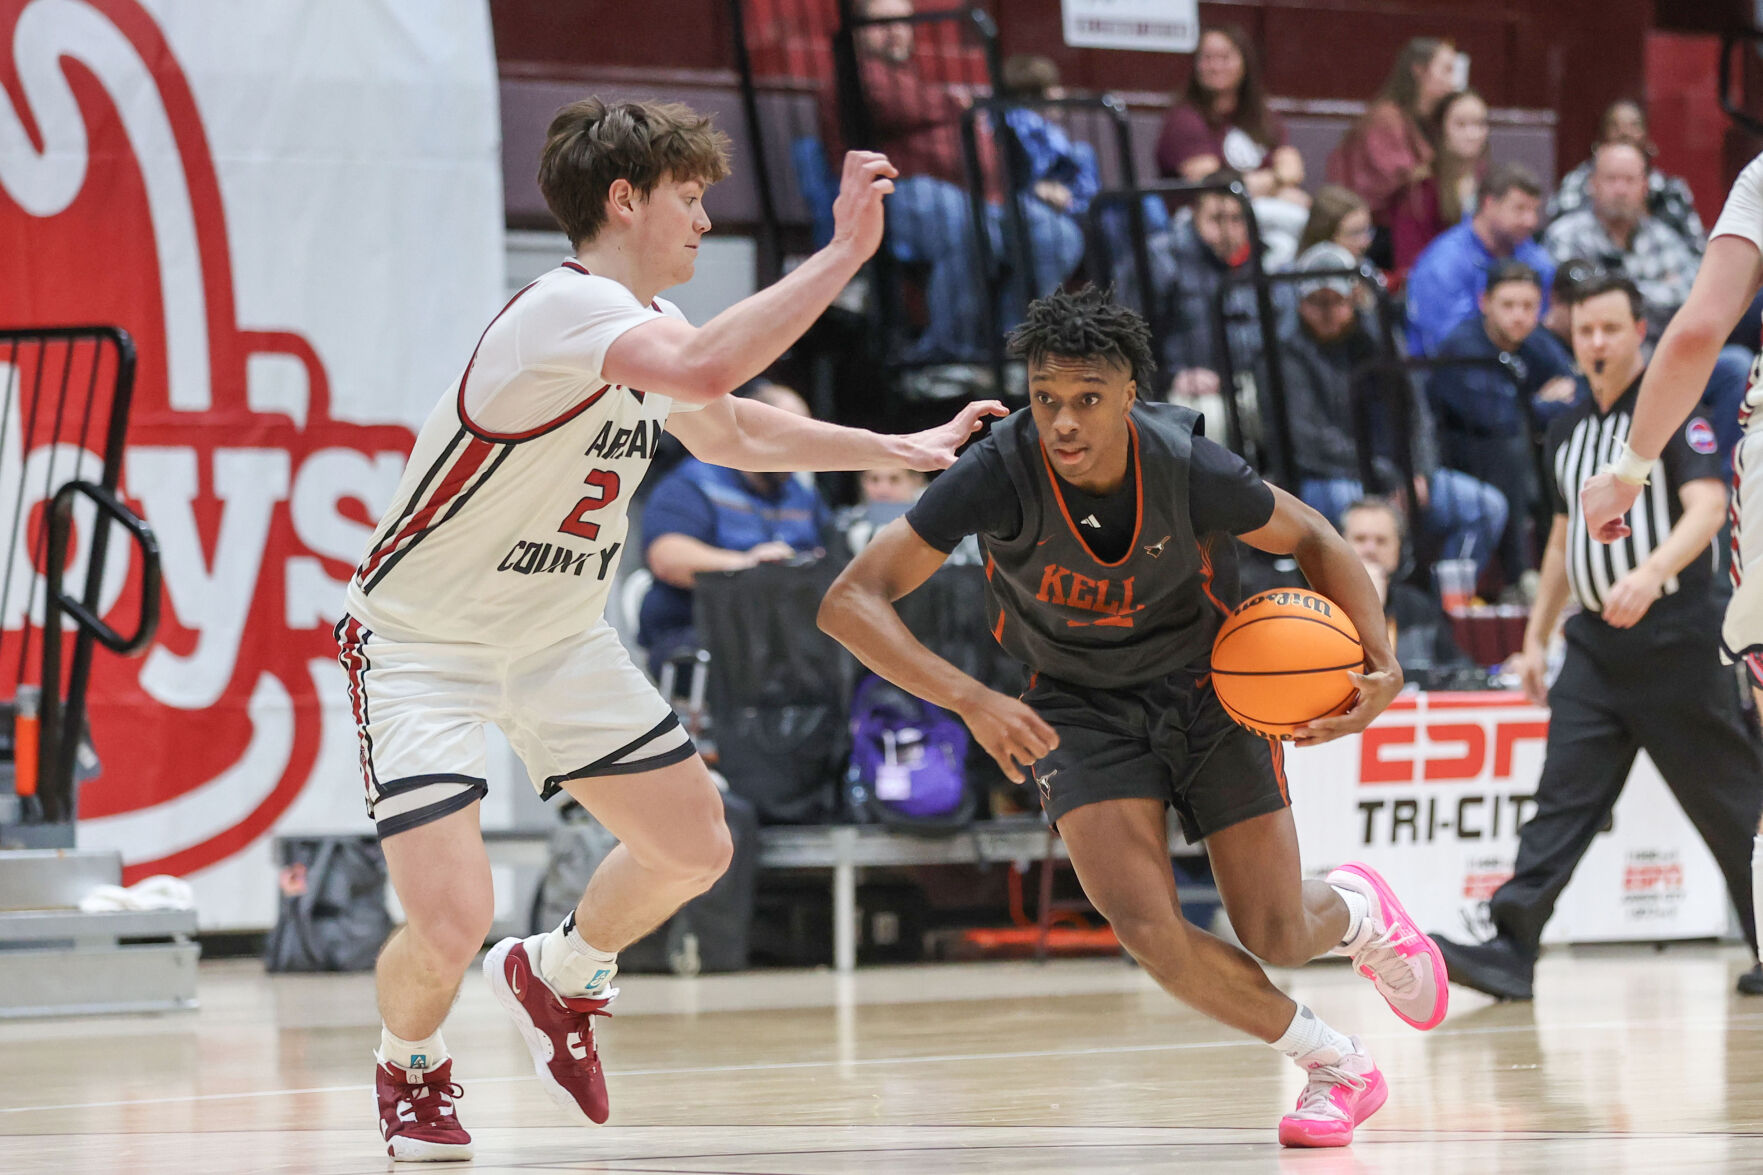 C.J. Brown Leads Kell Longhorns to 93-68 Victory with Stellar Performance